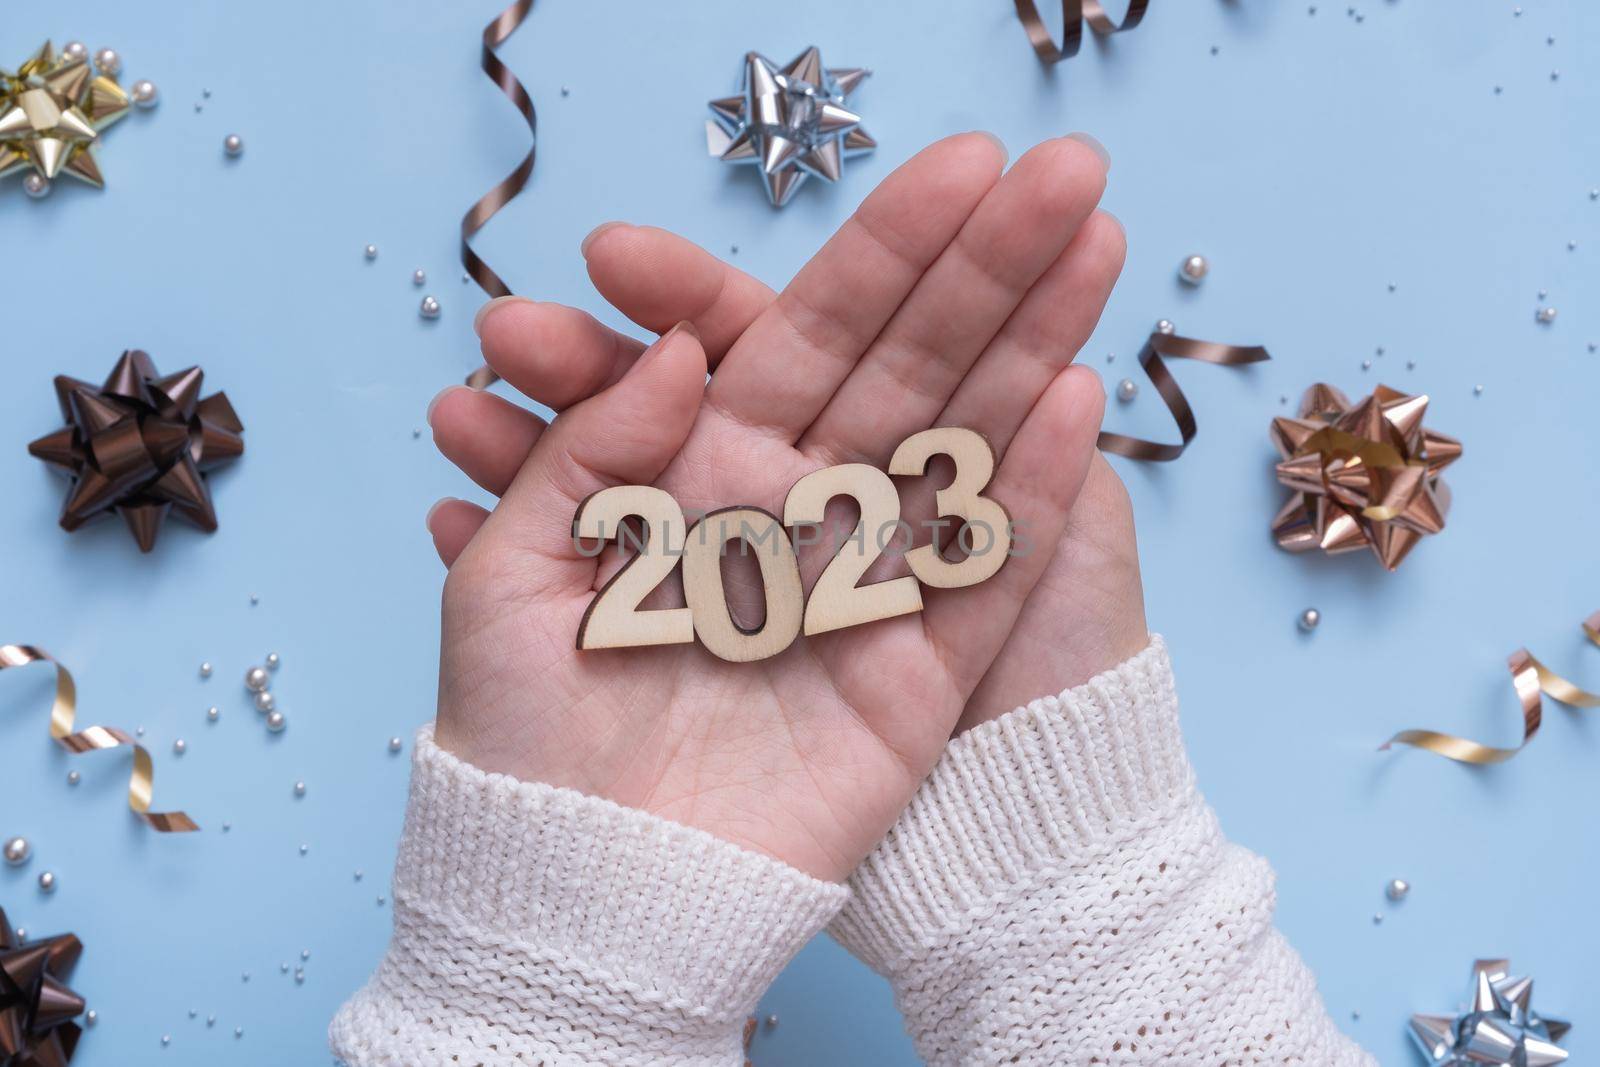 Numbers of the new year 2023 in female hands on a bright festive background with bows and beads top view.